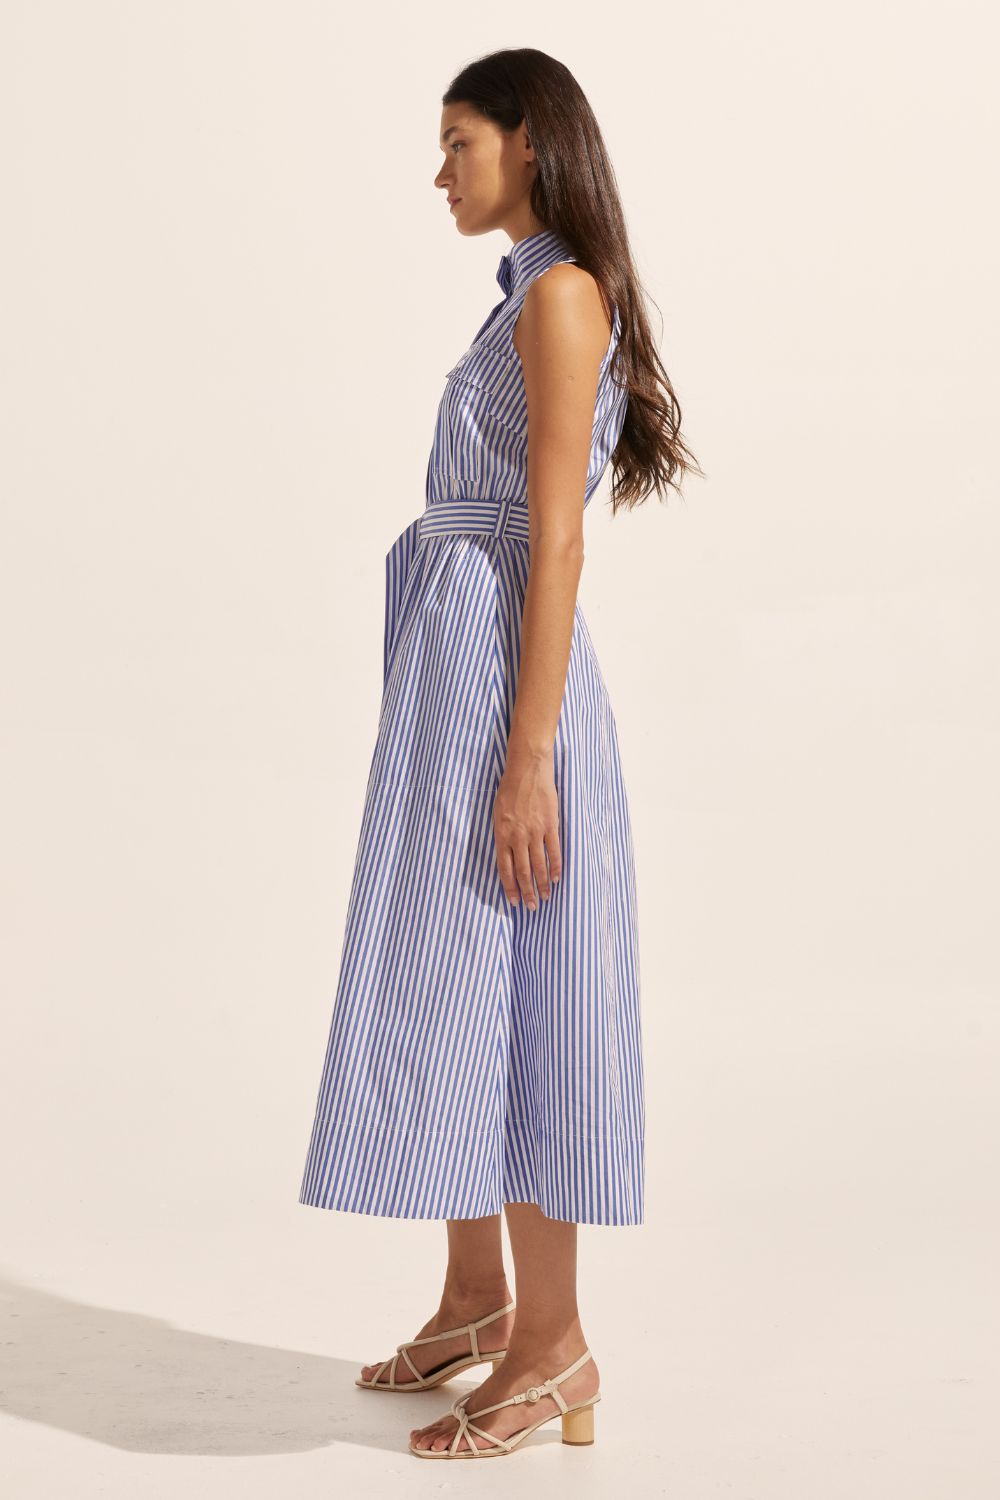 blue and white stripe, high neckline, side pockets, oversized patch pockets, covered placket, d-ring fabric belt, sleeveless, midi dress, side image